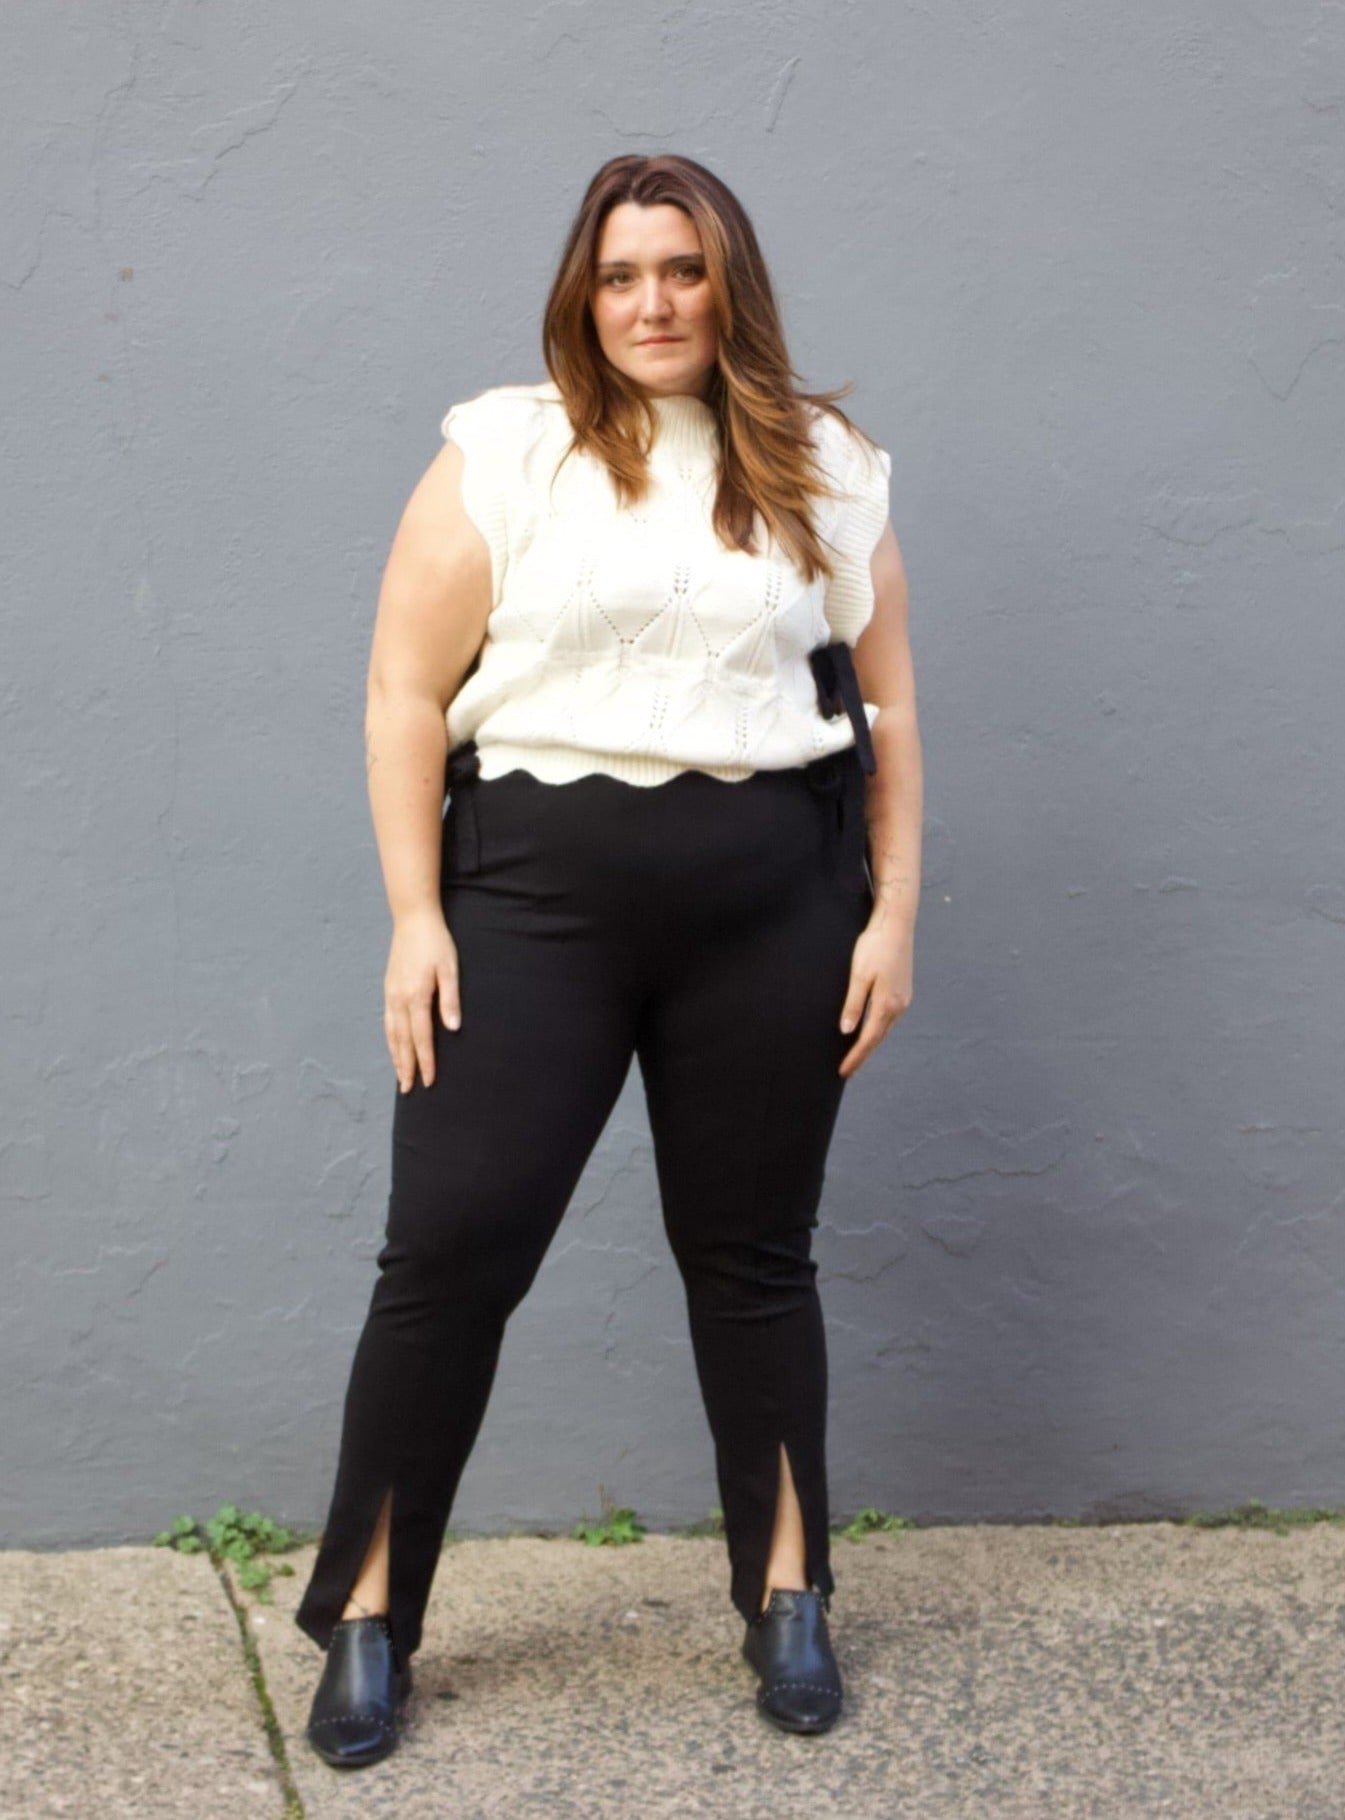 Bottom Slit Black Pants in Plus Business casual